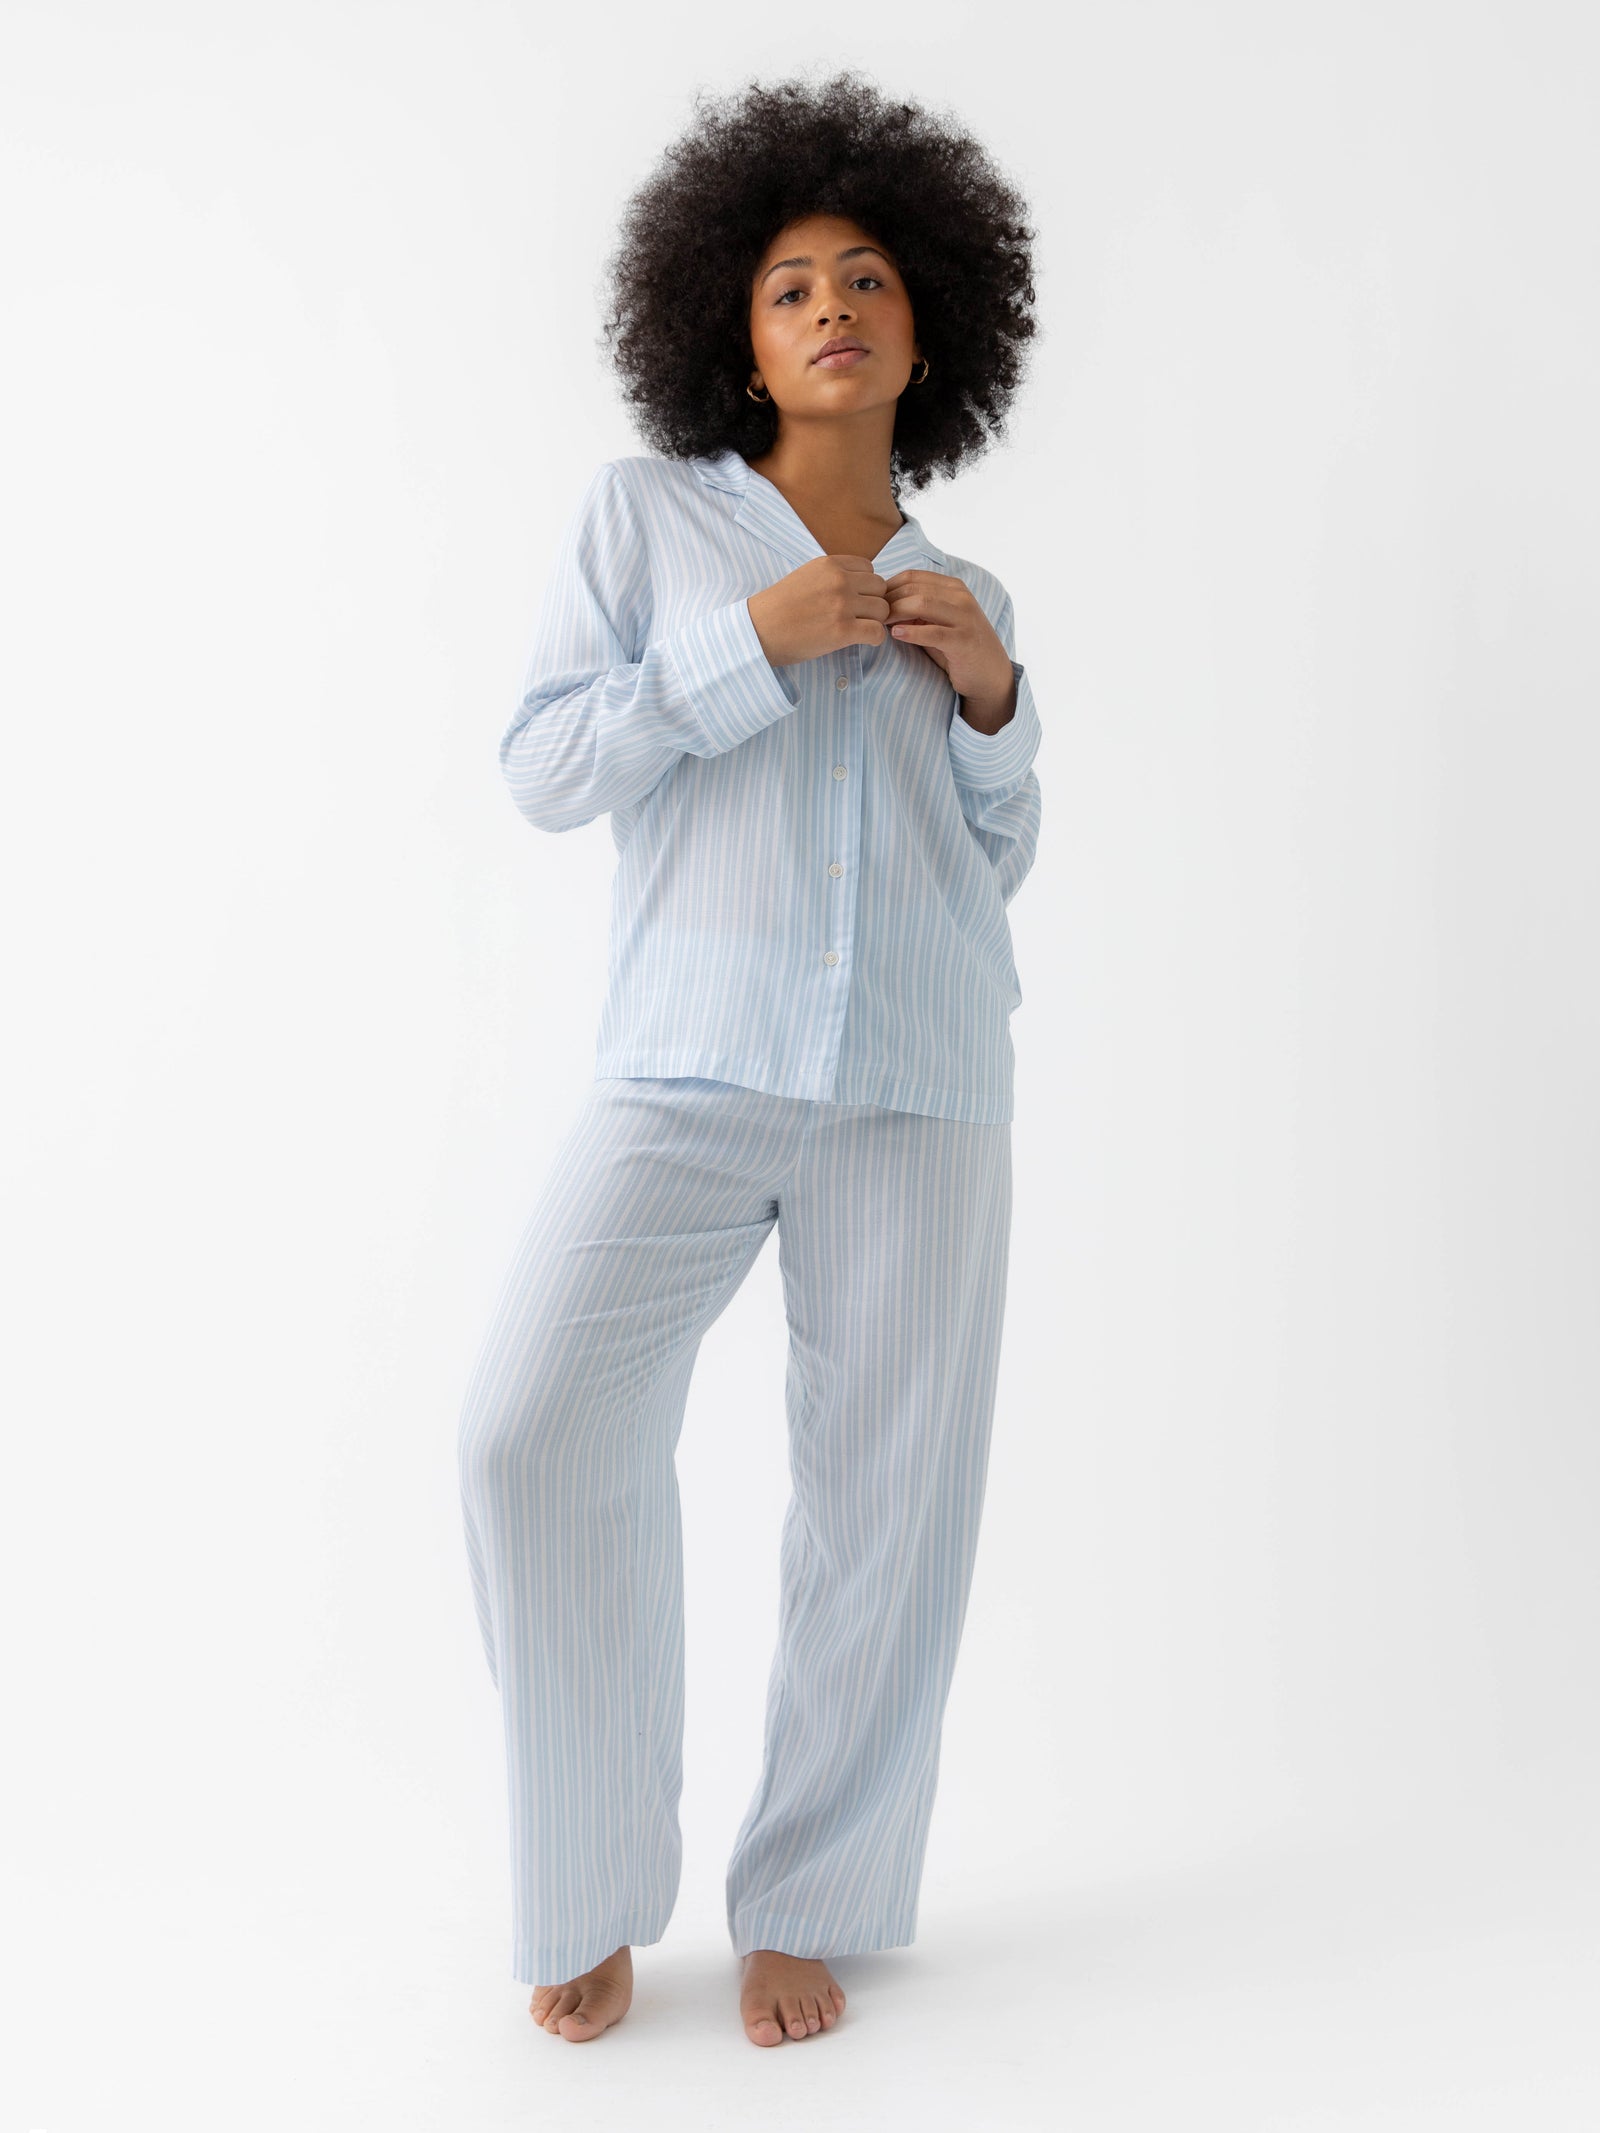 Woman in spring blue stripe soft woven pajama set with white background 